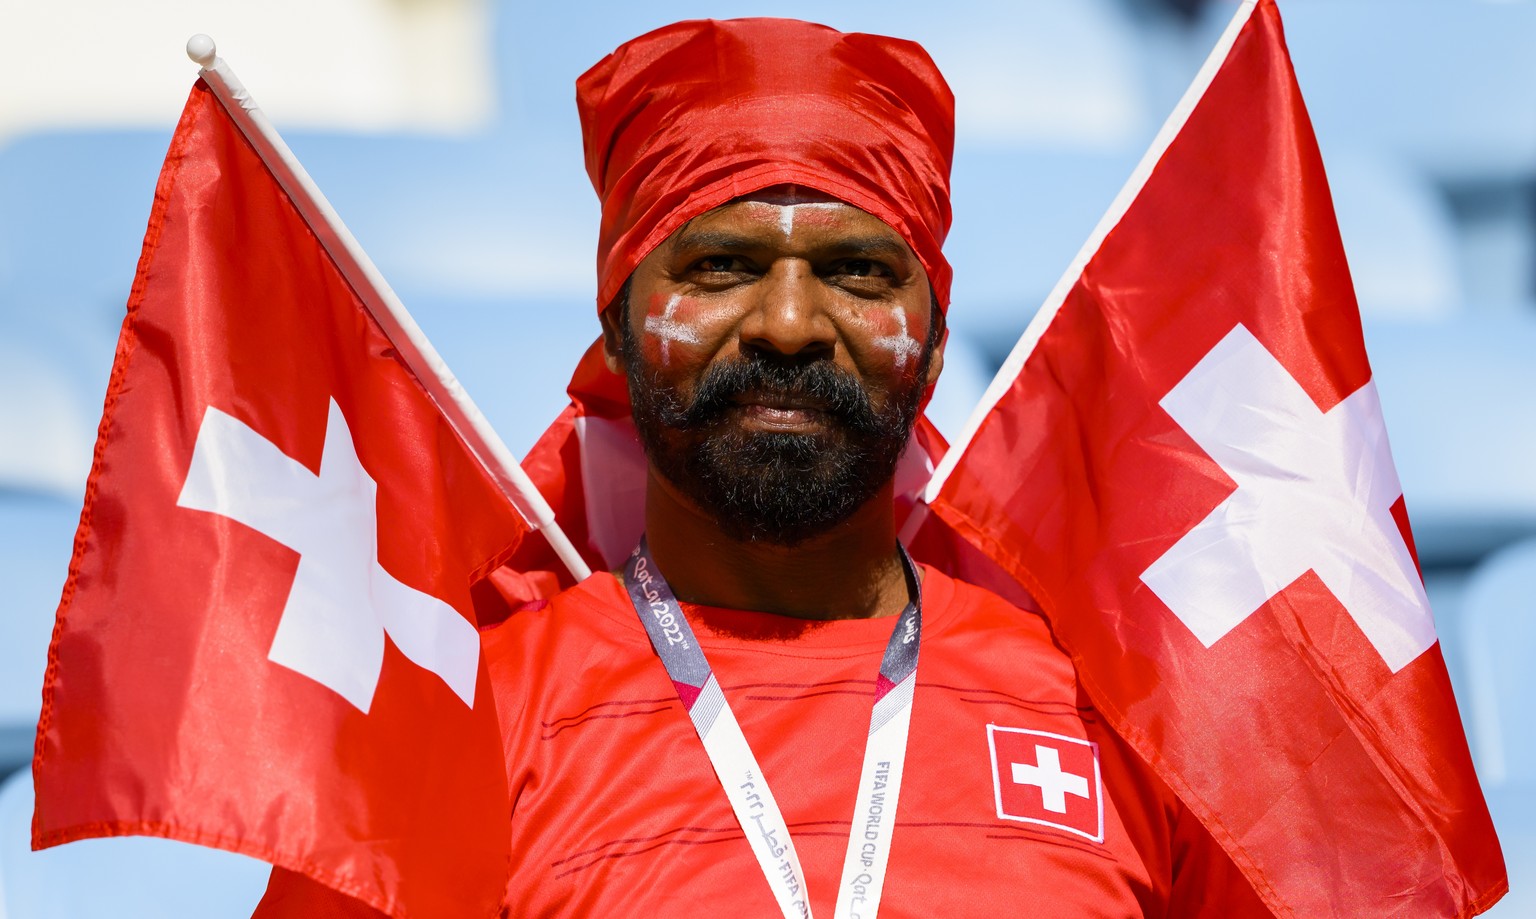 Swiss fan celebrates during the FIFA World Cup Qatar 2022 group G soccer match between Switzerland and Cameroon at the Al-Janoub Stadium in Al-Wakrah, south of Doha, Qatar, Thursday, November 24, 2022 ...